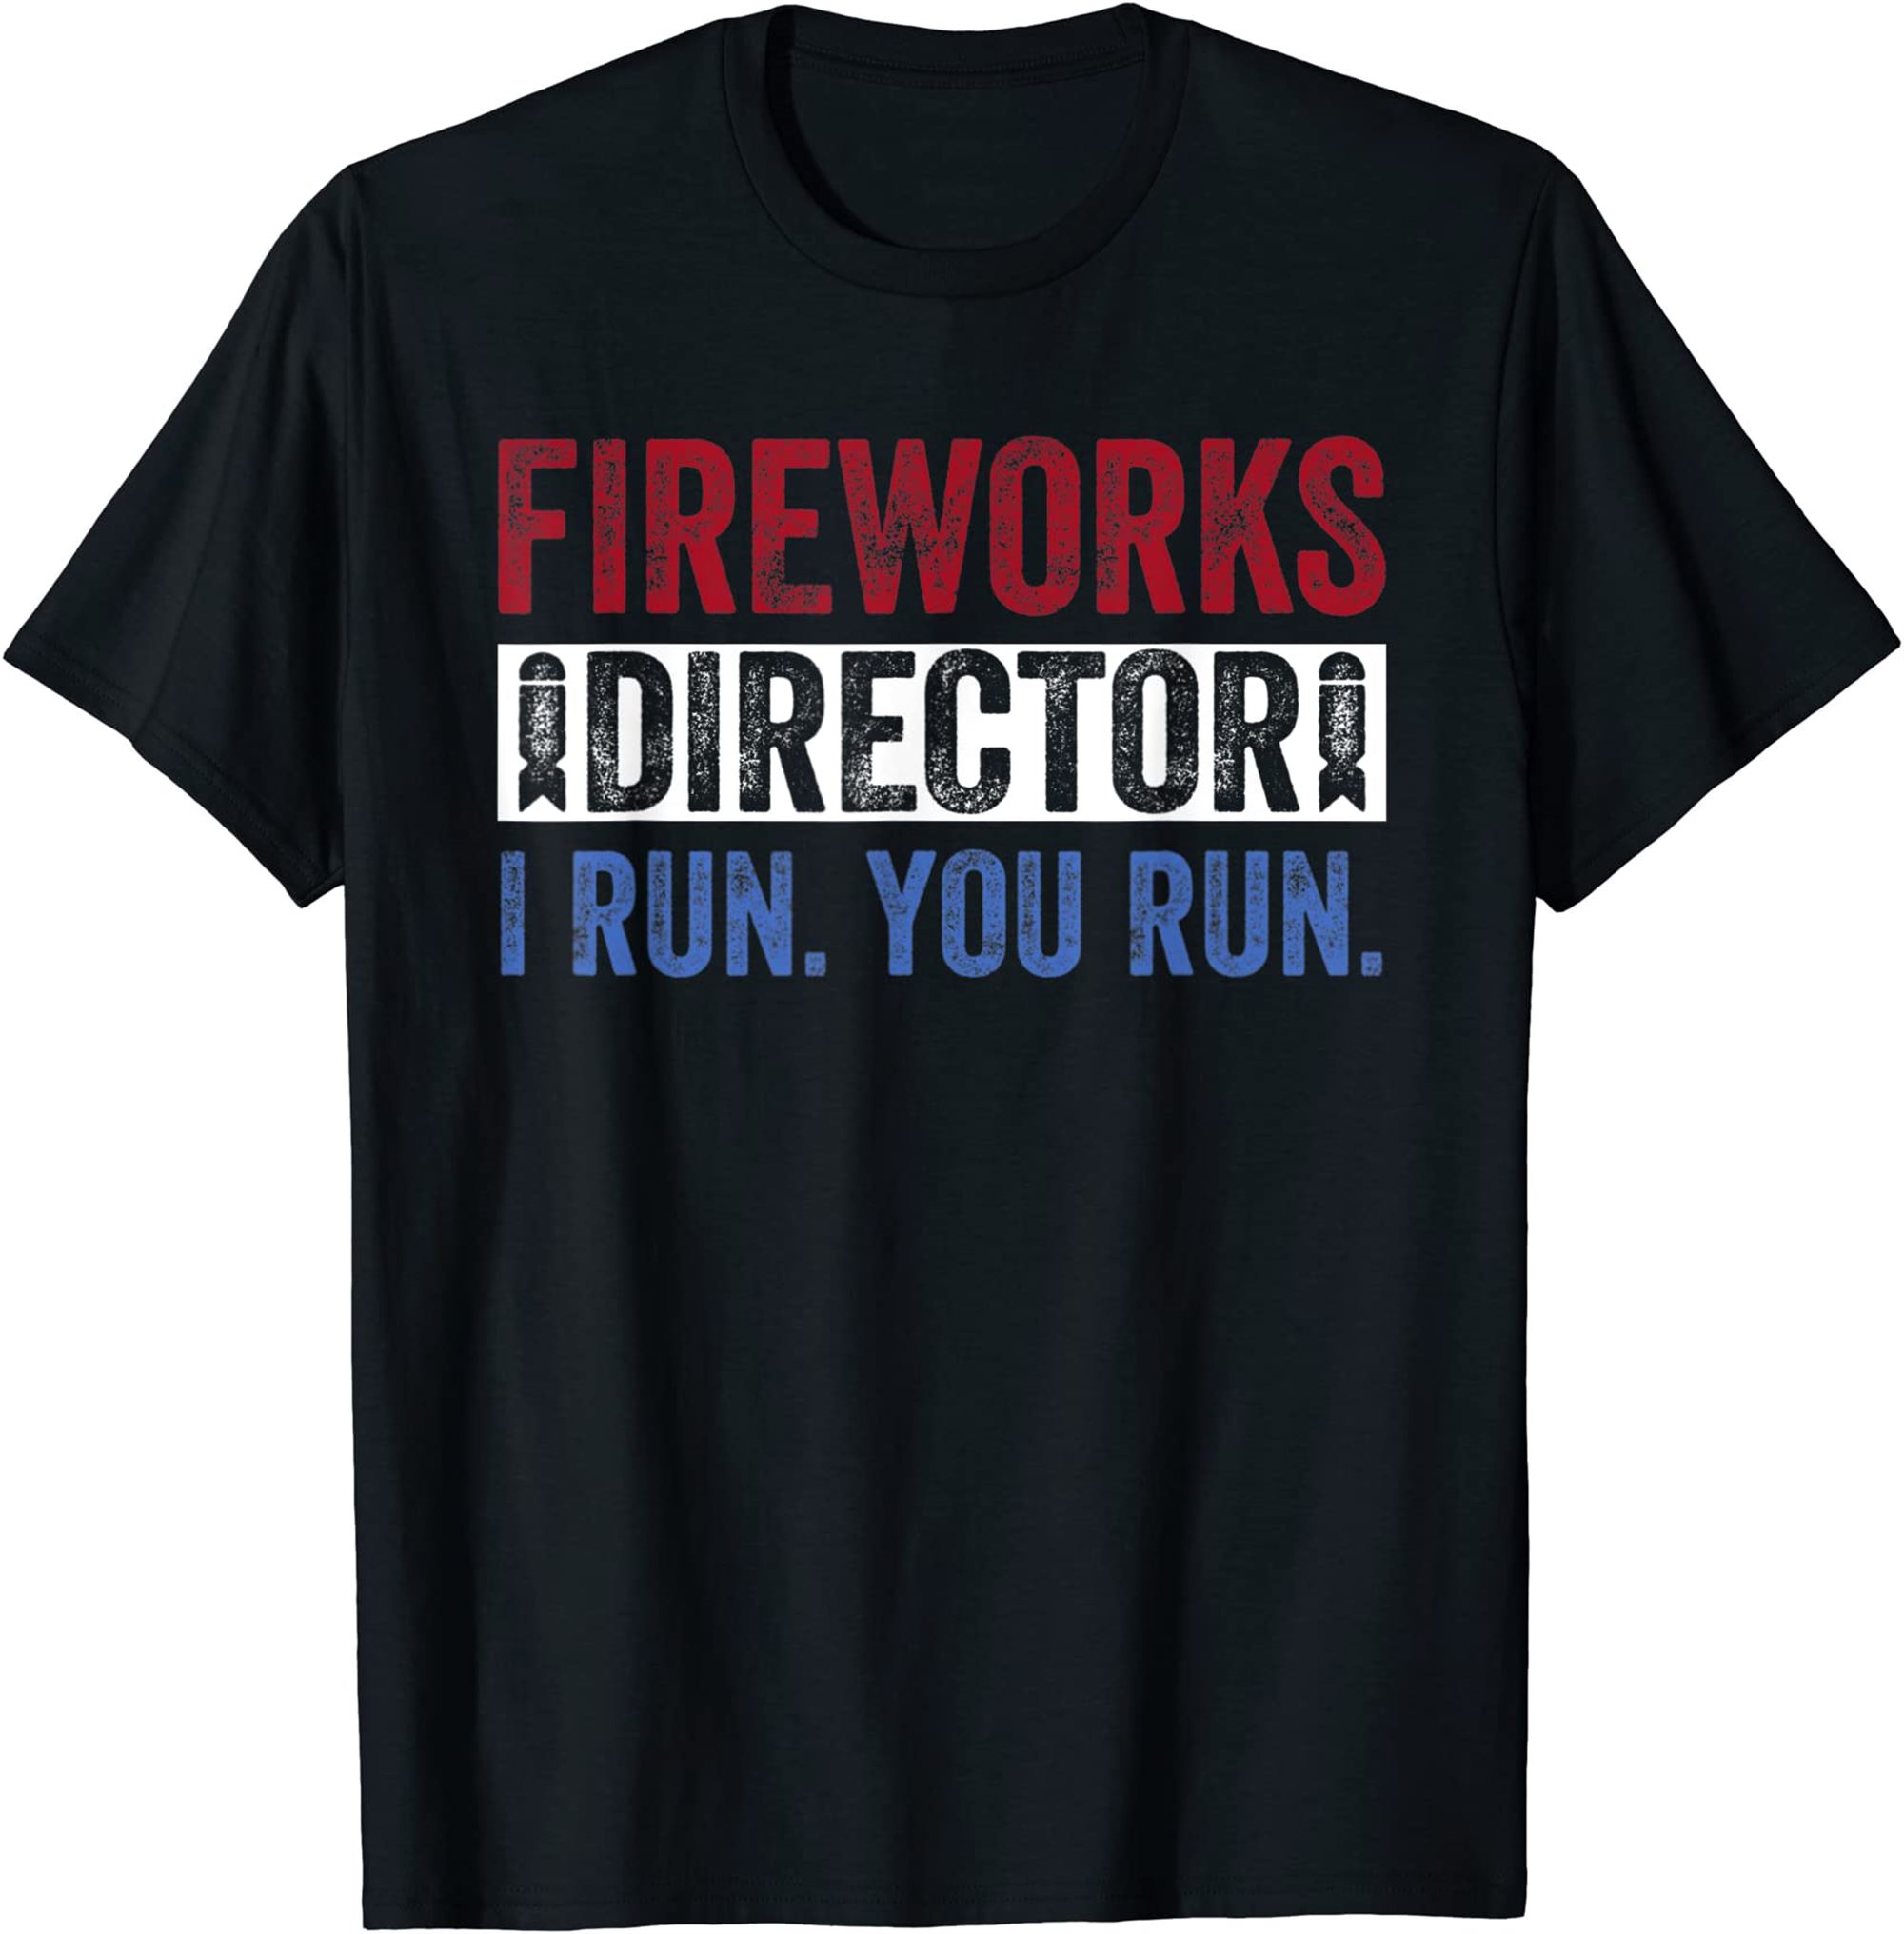 Fireworks Director Shirt Funny 4th Of July Red White Blue T-shirt Full Size Up To 5xl